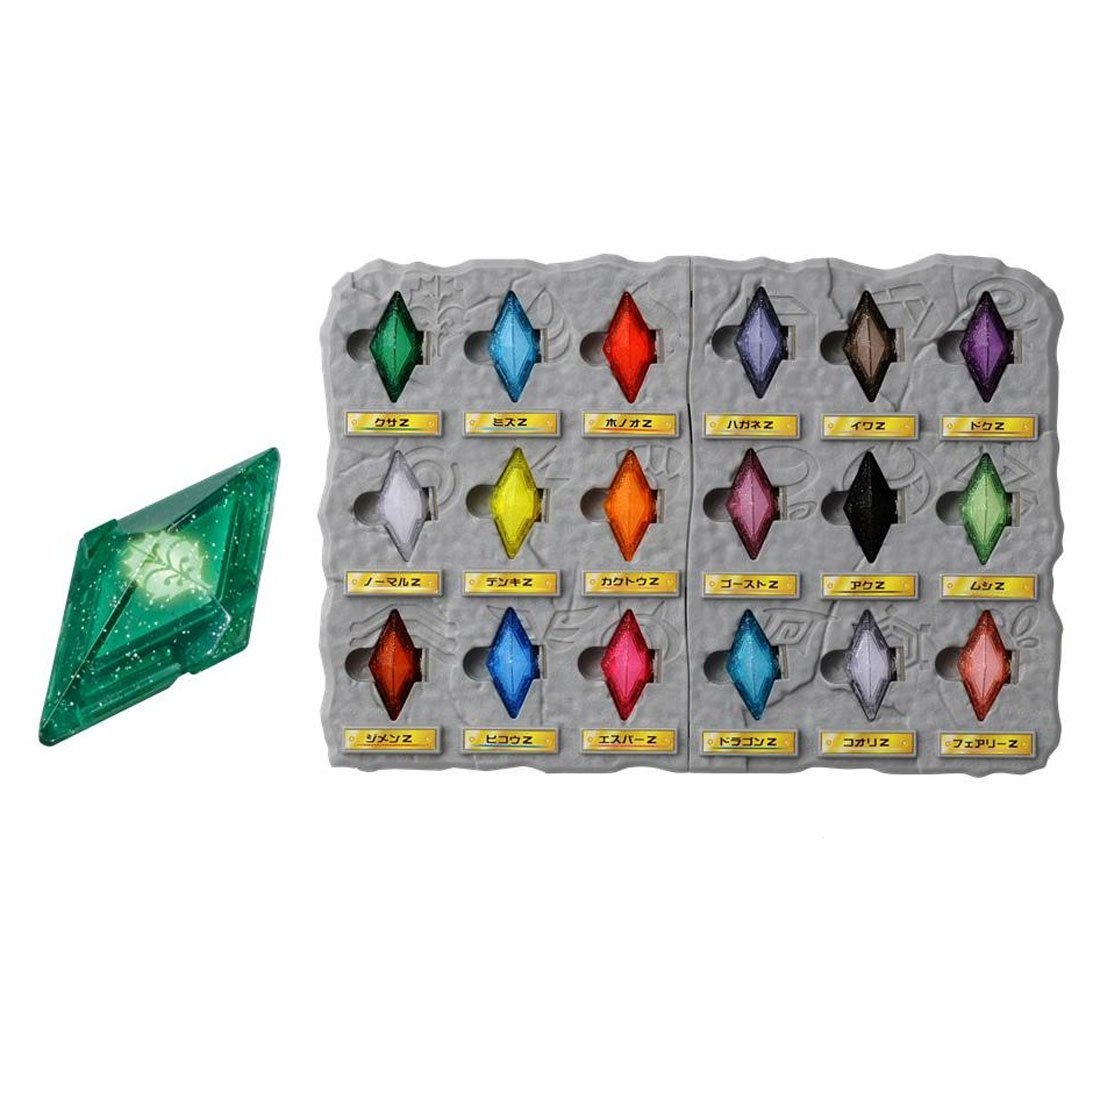 Have A Look At The Pokemon Z-Power Ring Set And New Z-Crystals